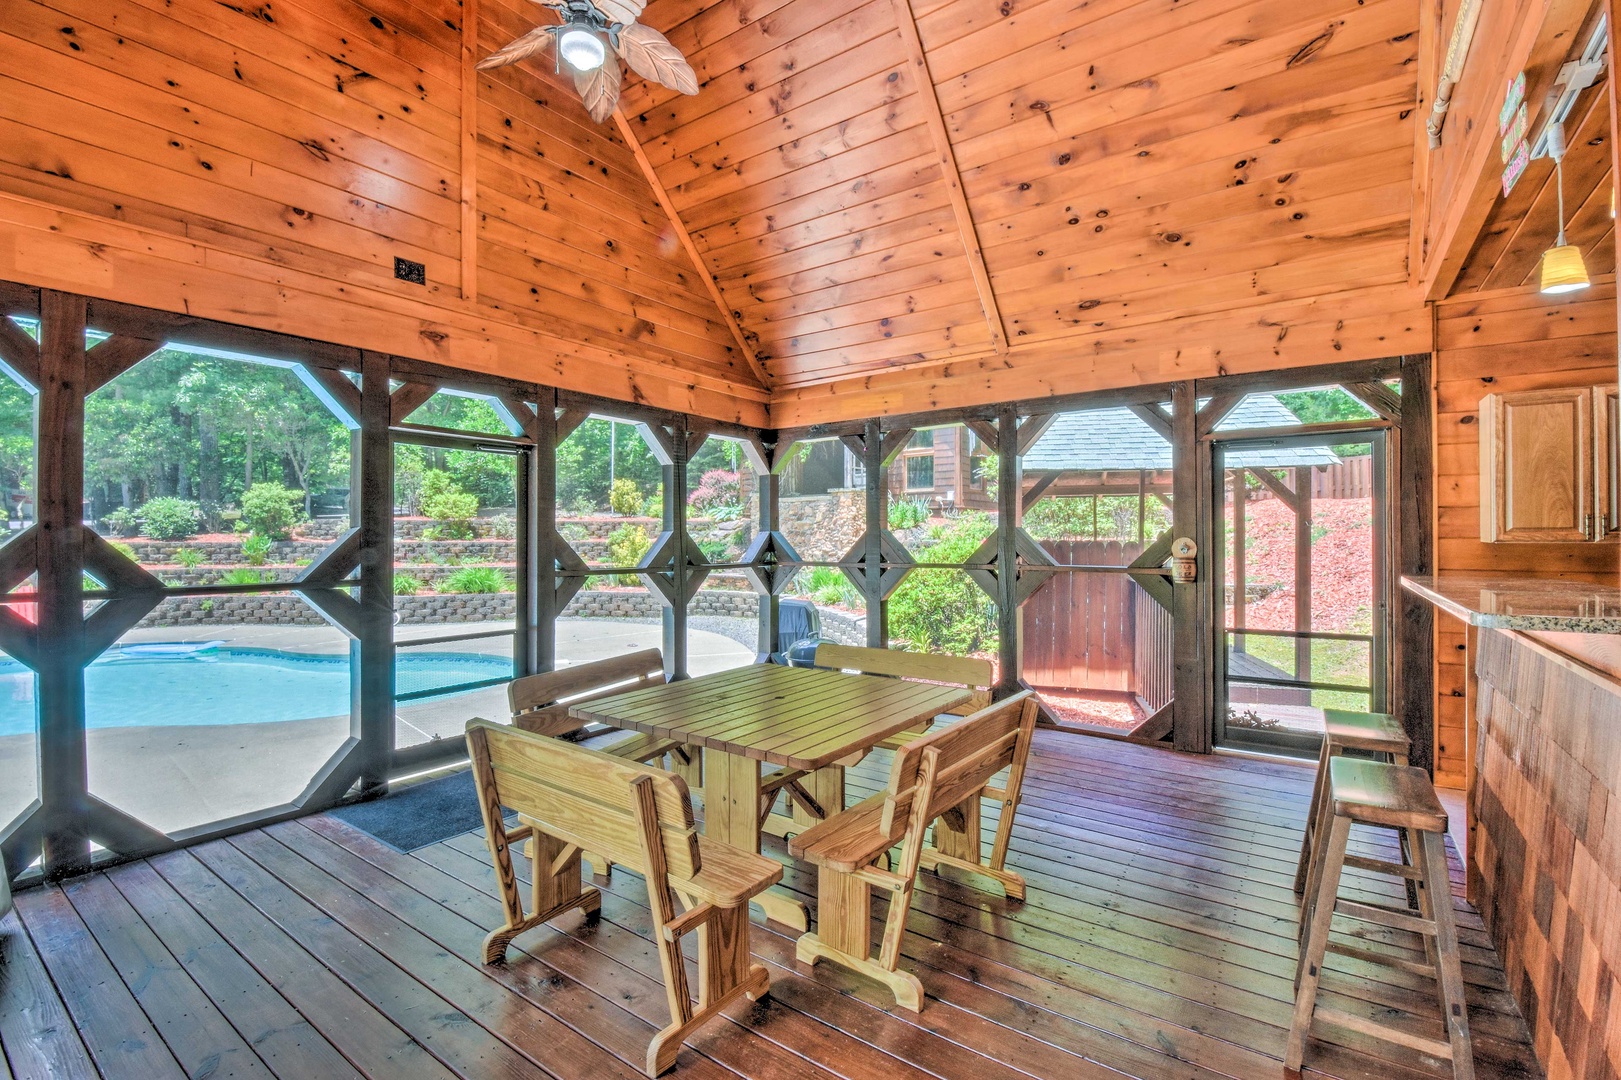 Deer Watch Lodge- Pool house with table and chairs